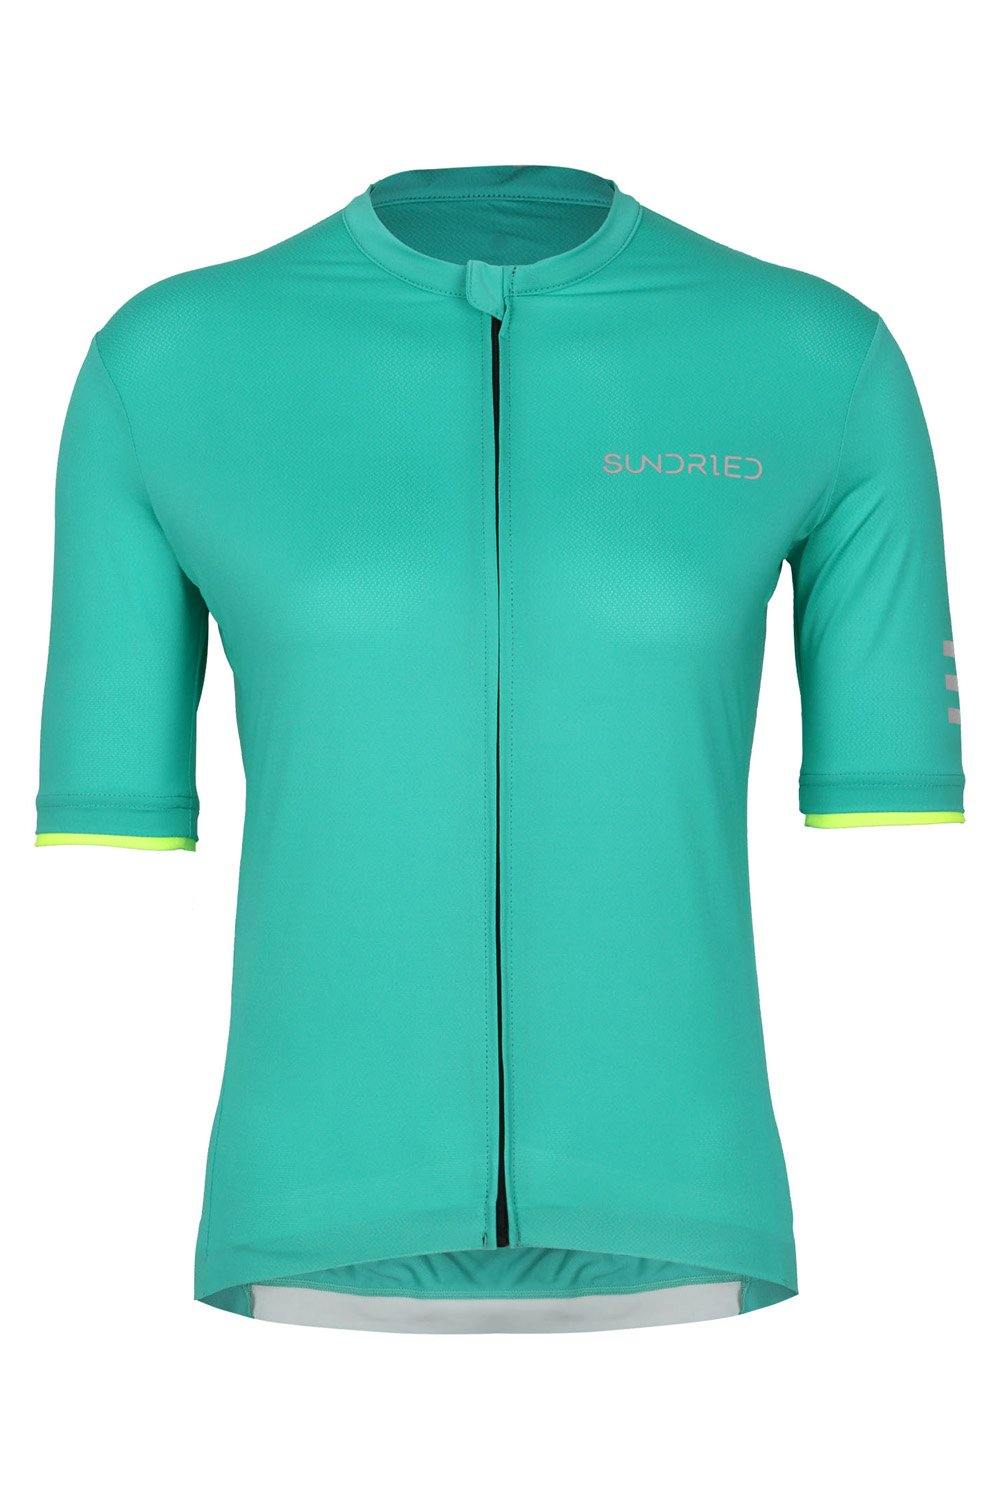 Sundried Apex Women's Short Sleeve Cycle Jersey Short Sleeve Jersey XL Turquoise SD0340 XL Turquoise Activewear